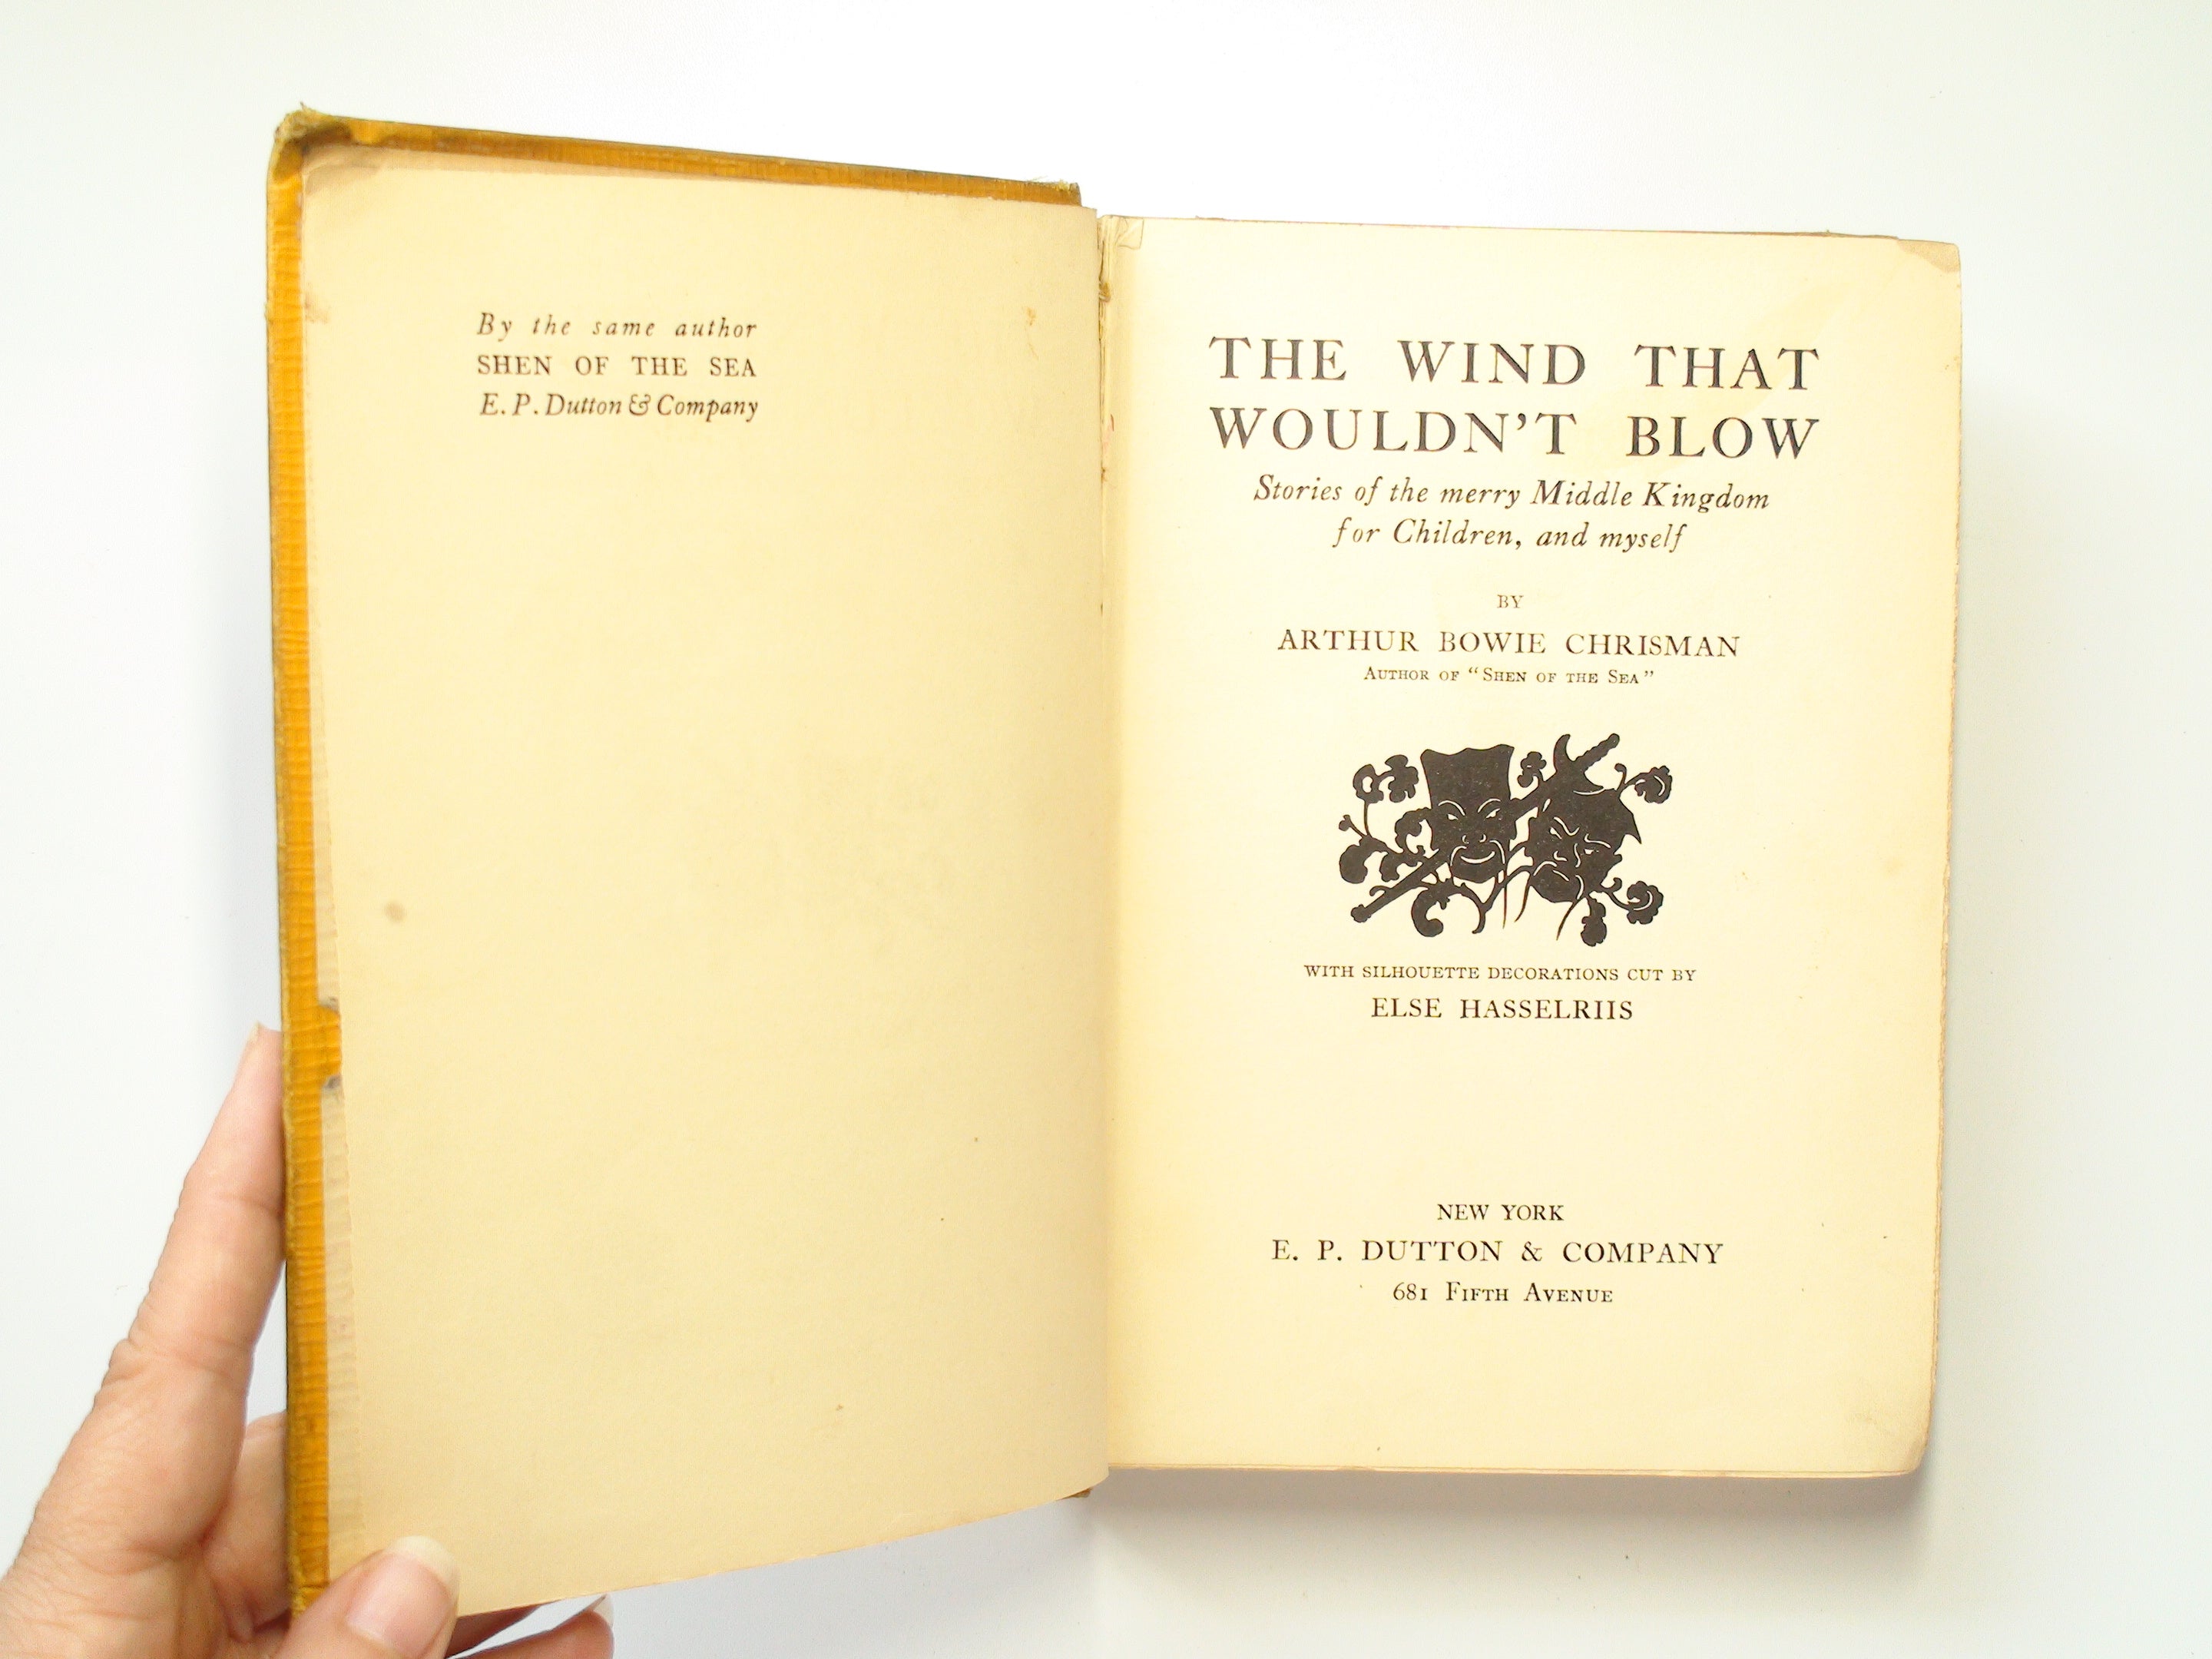 The Wind That Wouldn't Blow, by Arthur Bowie Chrisman, Illustrated, 1st Ed, 1927